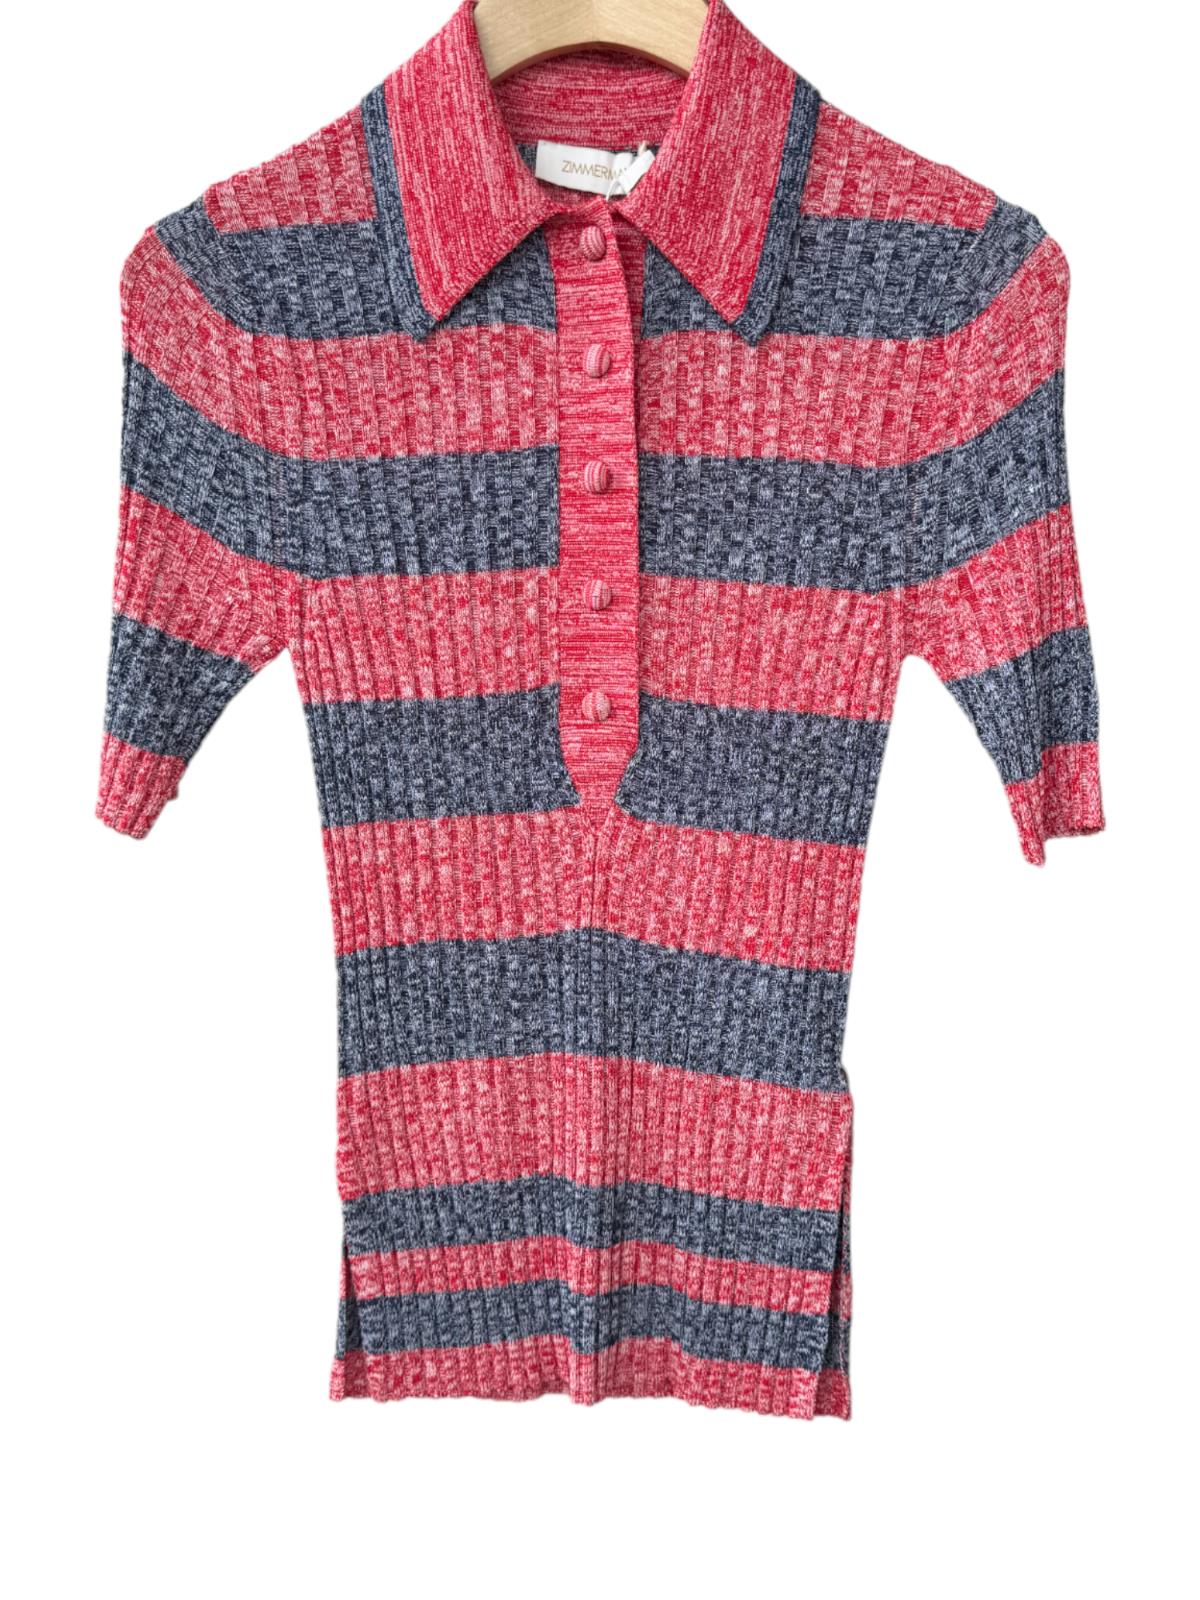 Zimmermann High Tide Rib Polo Shirt | Navy/Red Marle Striped, Stretch, Knitted